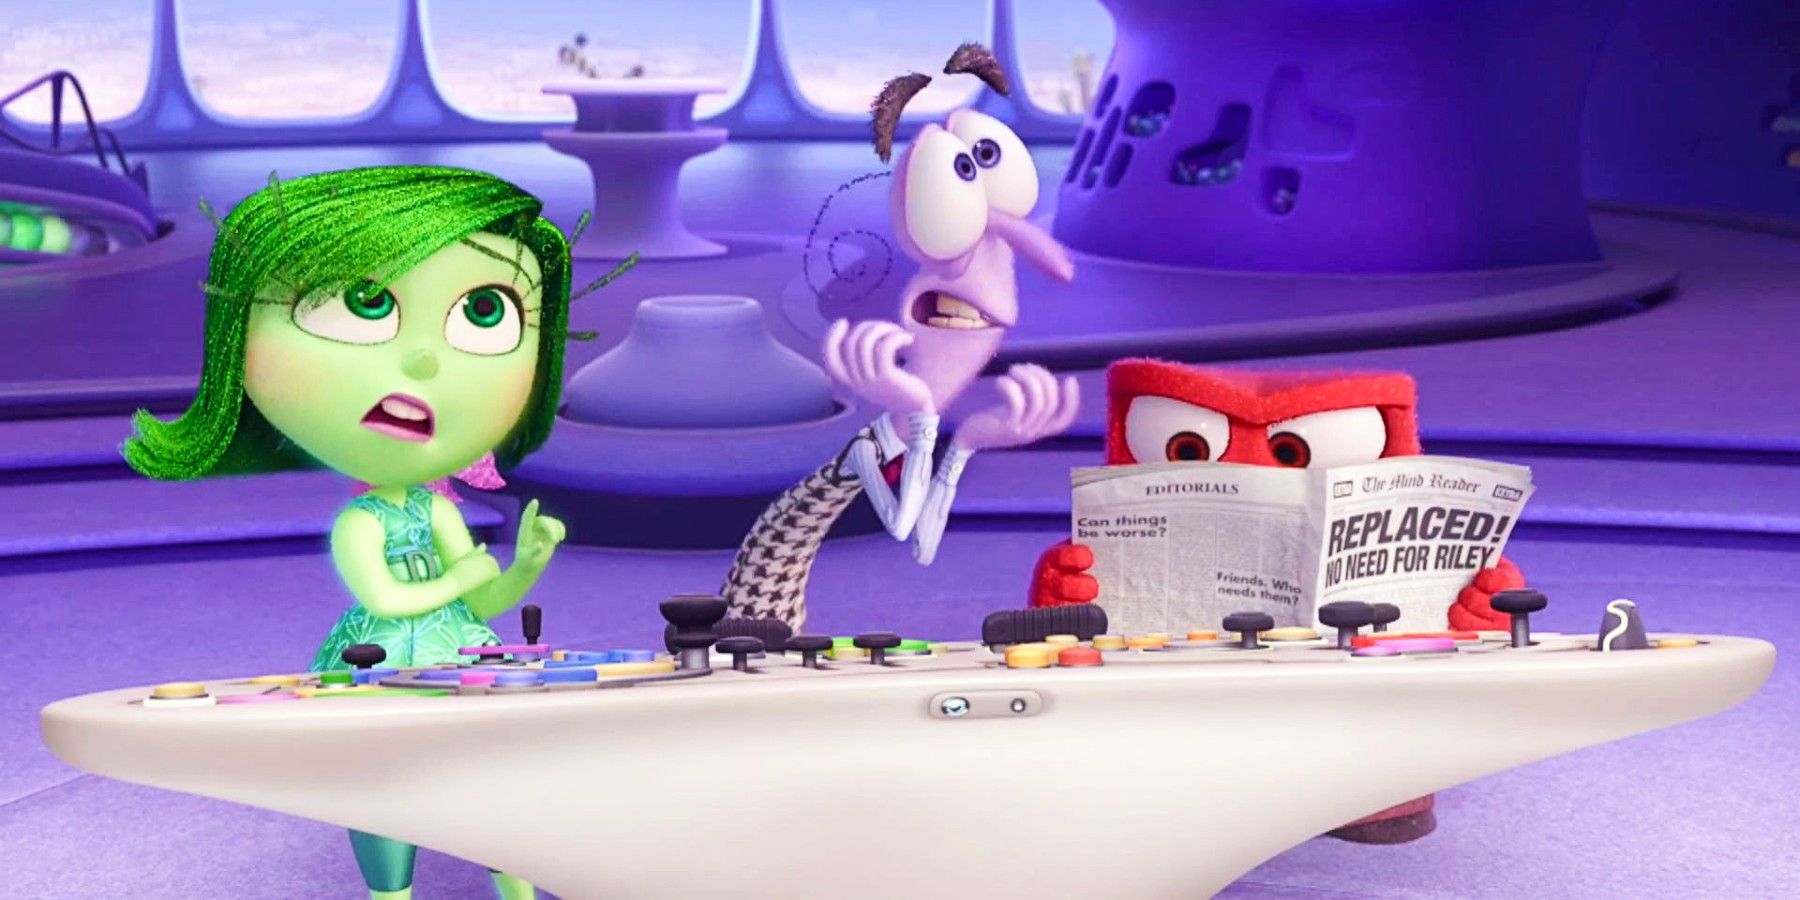 Disgust Fear and Anger in Inside Out